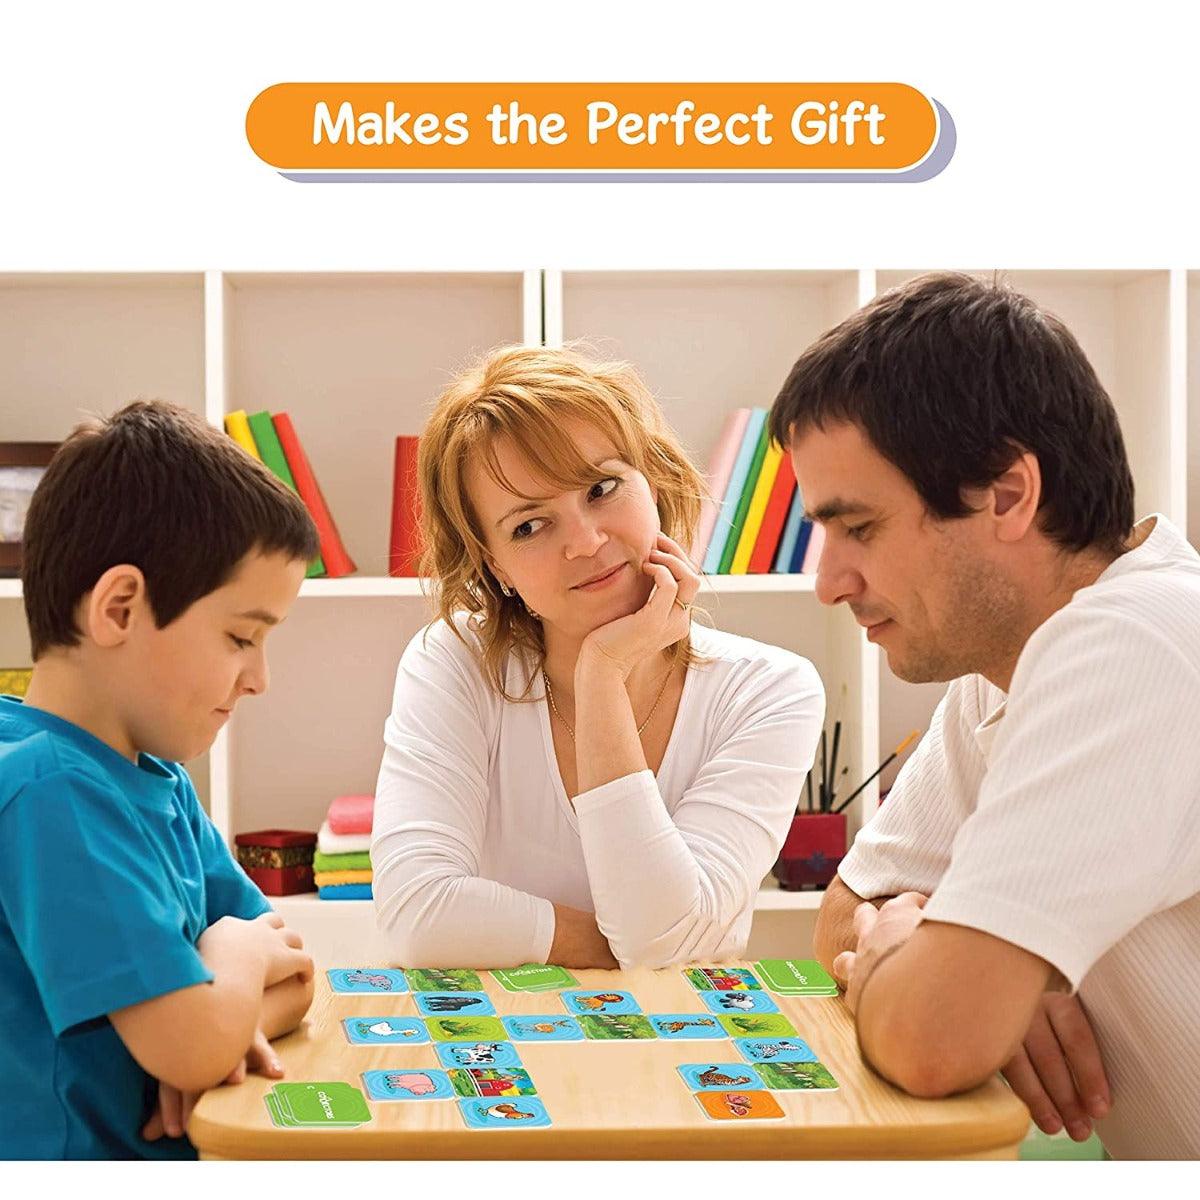 Skillmatics Connectors Educational Game: Animal Planet | Fun & Fast Family Game of Smart Connections | Gifts for Boys and Girls Ages 3-6